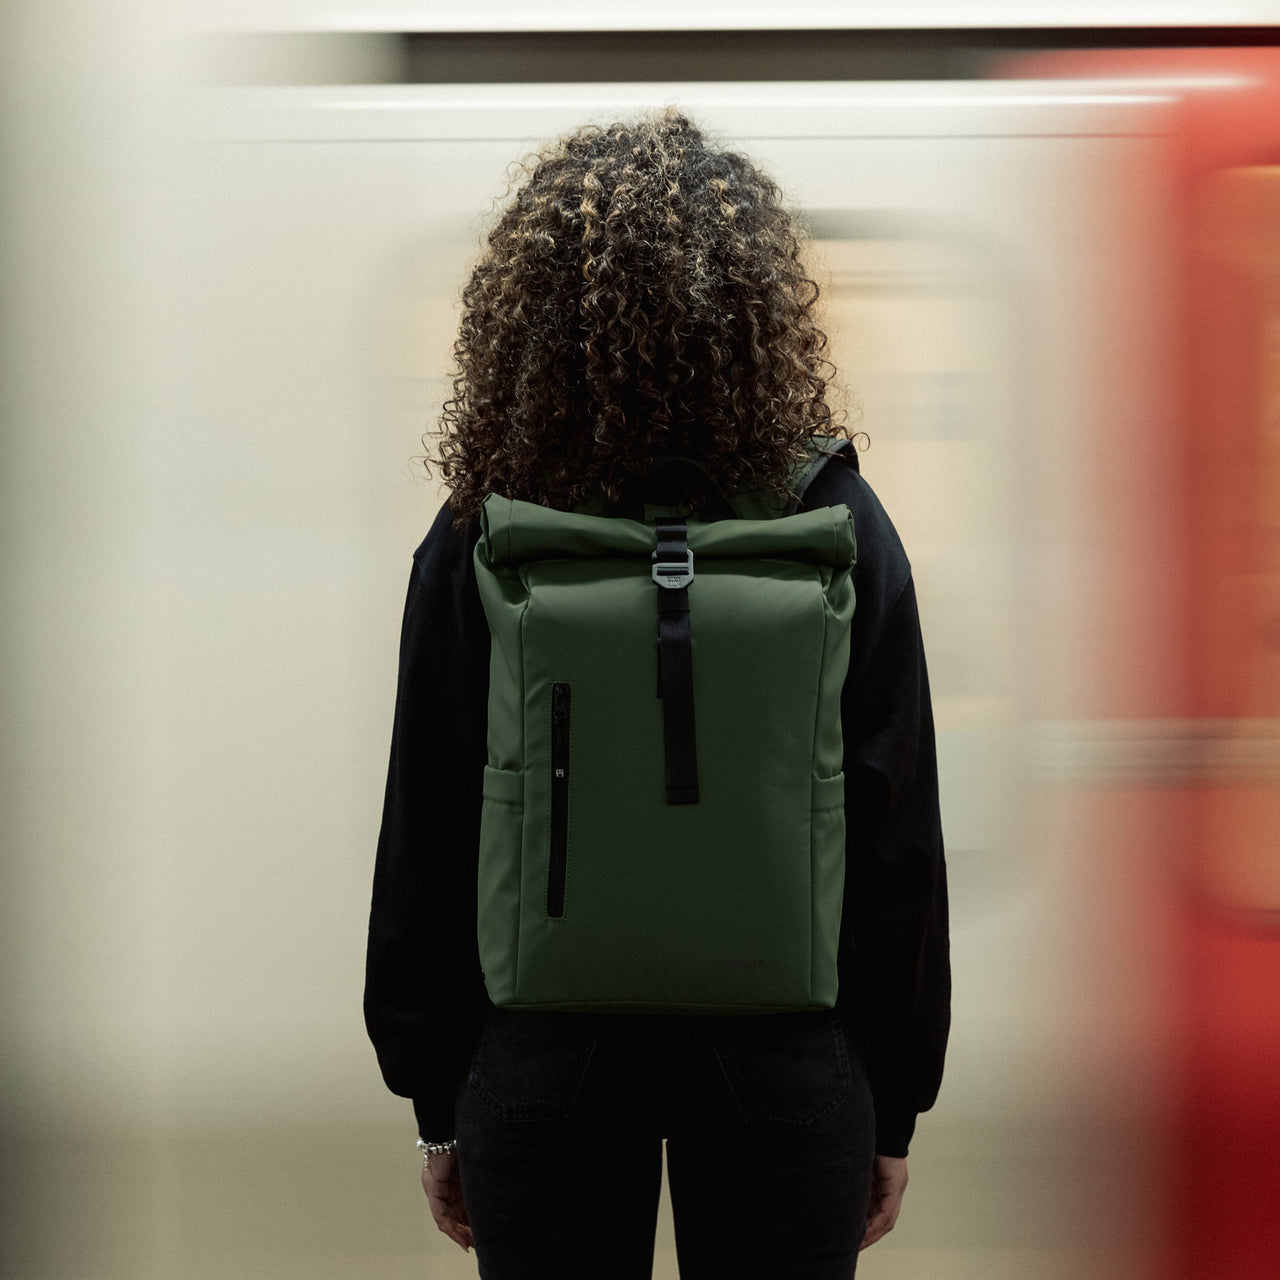 Women wearing the Roll Top 15L in Urban Green by a blurry train that is moving very fast